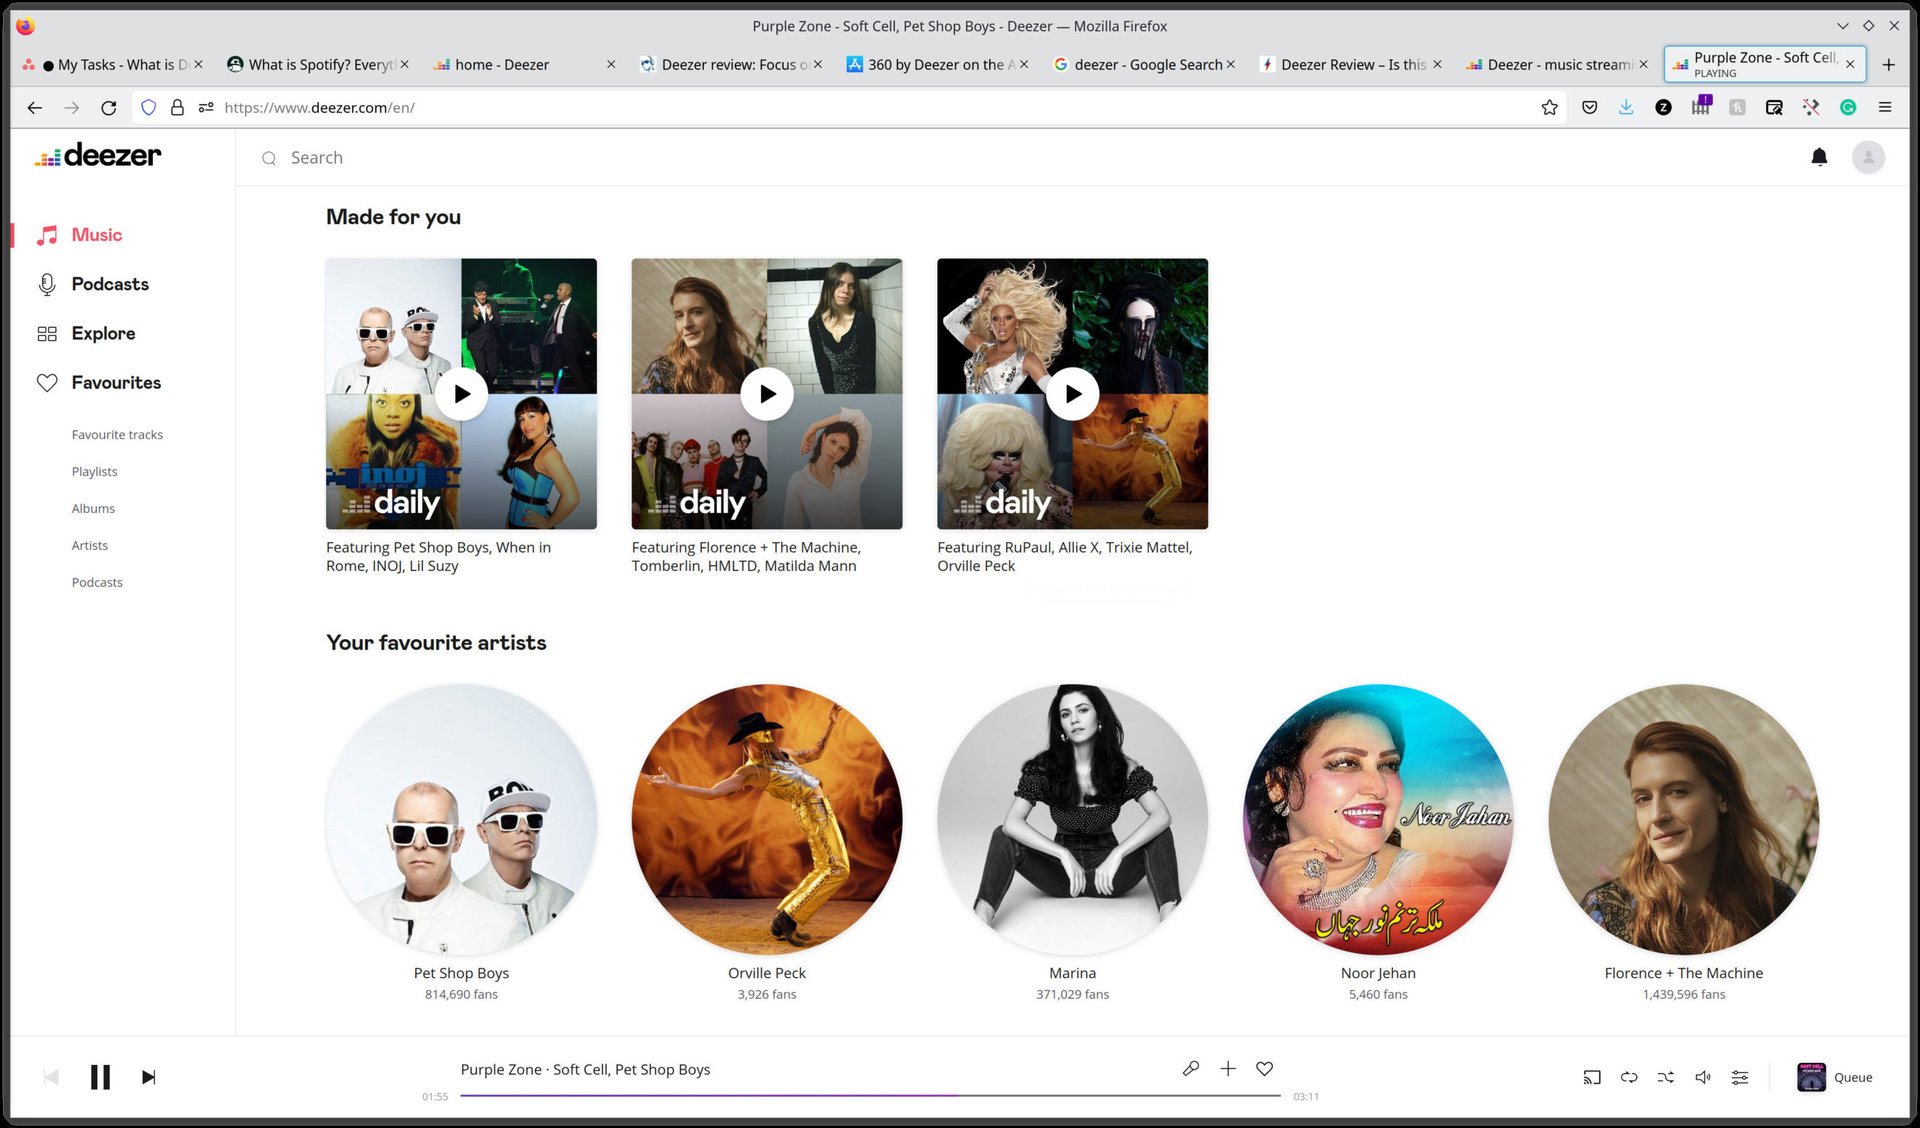 The Deezer &quot;made for you&quot; and &quot;your favorite artists&quot; curated selections.